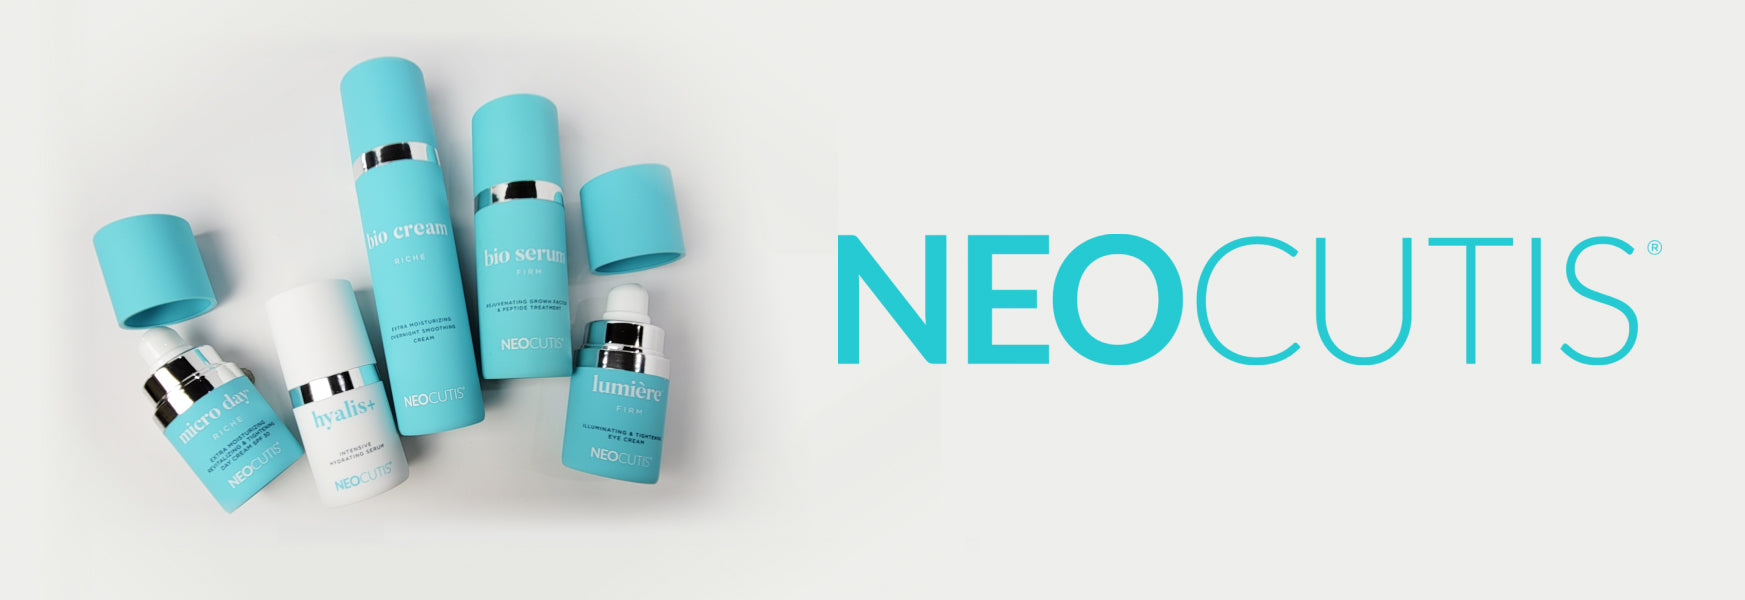 Five Neocutis product bottles, some with their caps removed, laying on a pale grey background,with the turquoise-colored NEOCUTIS logo to the right.